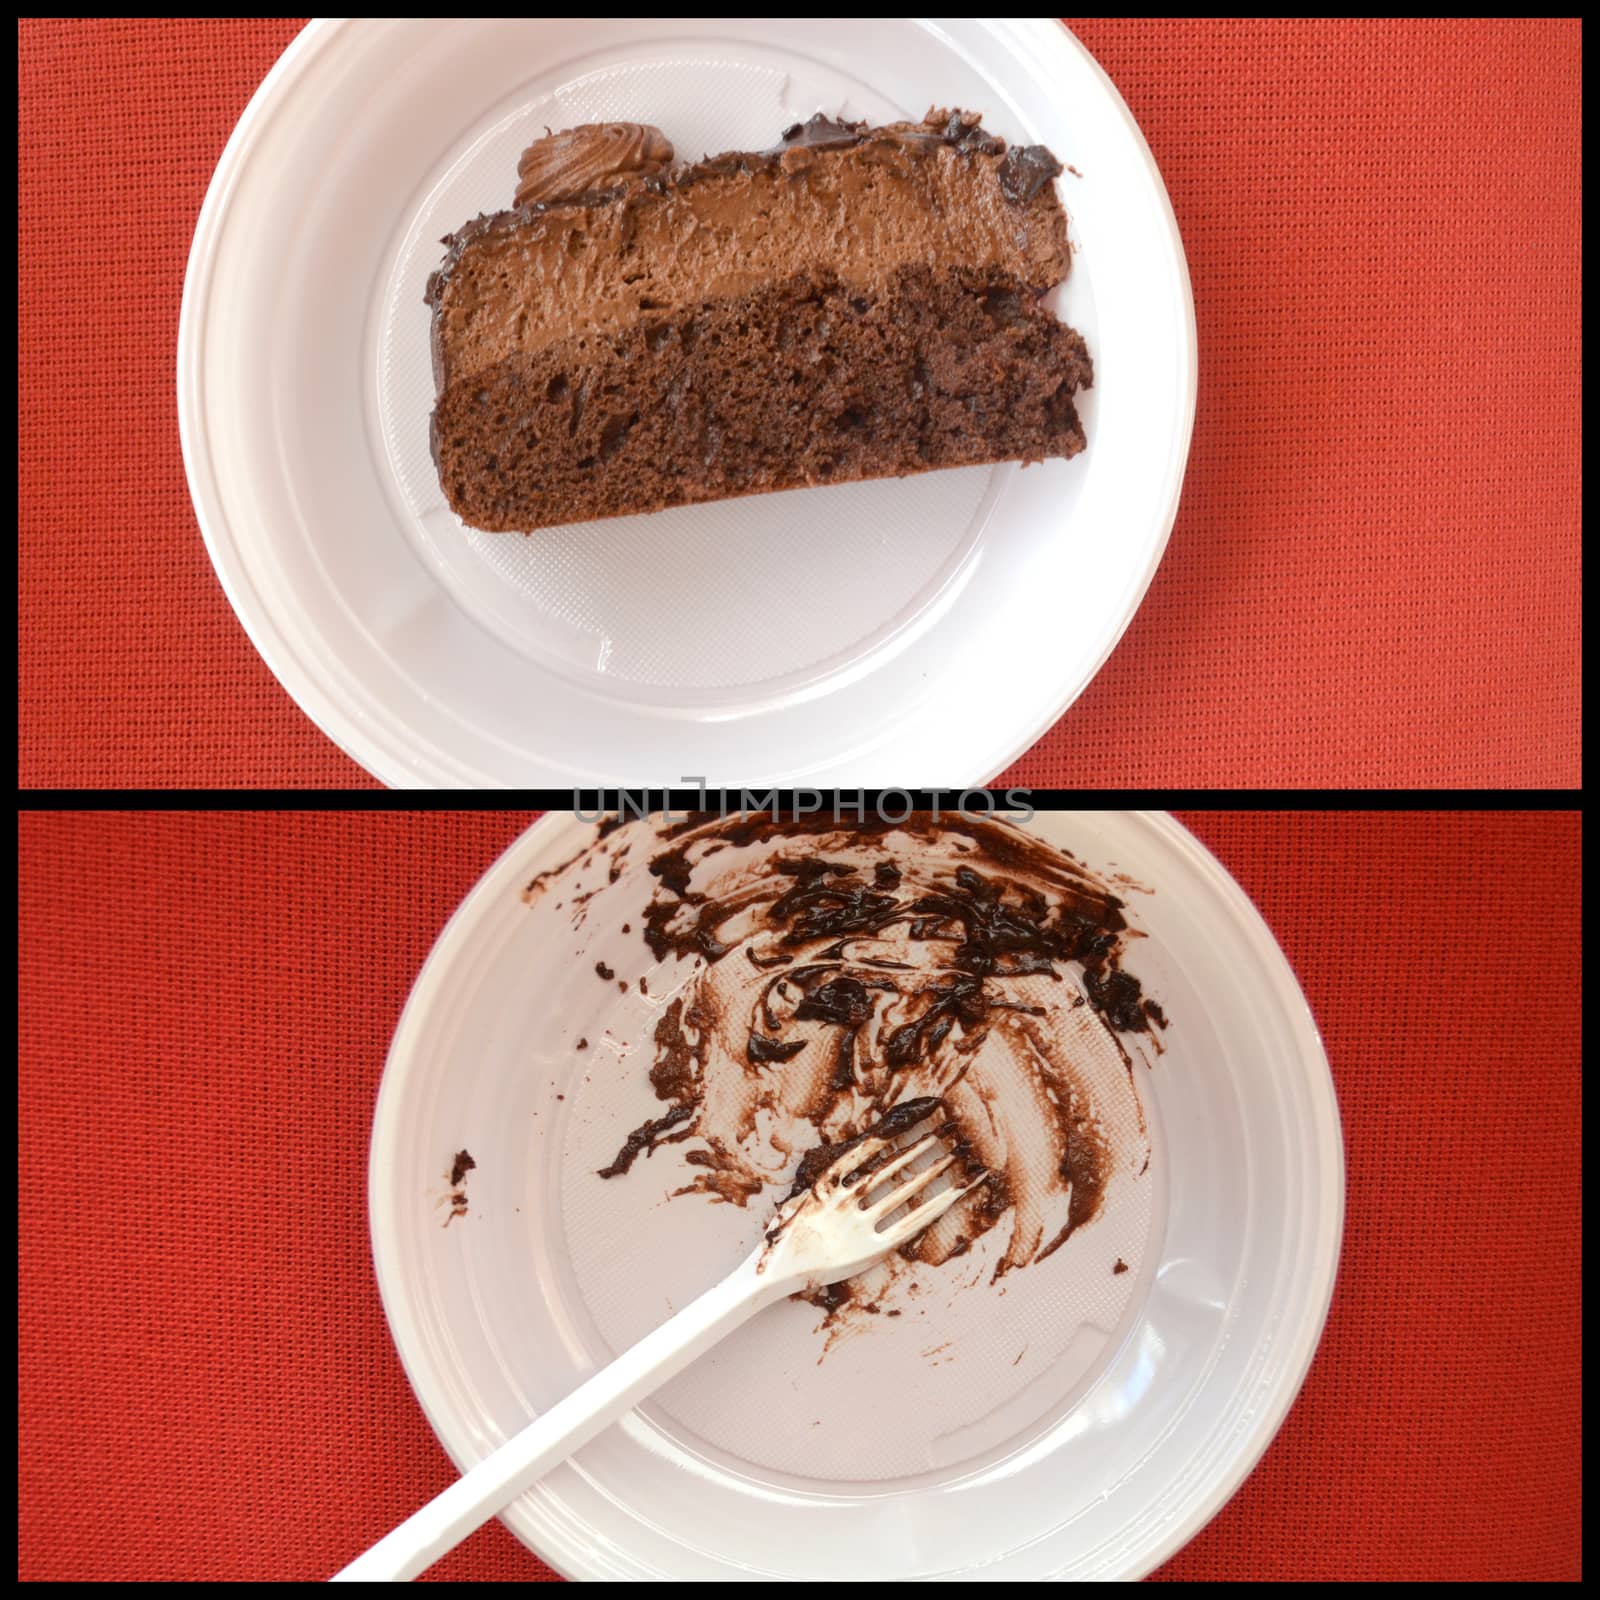 picture of a Dark chocolate cake in a plastic plate, before and after